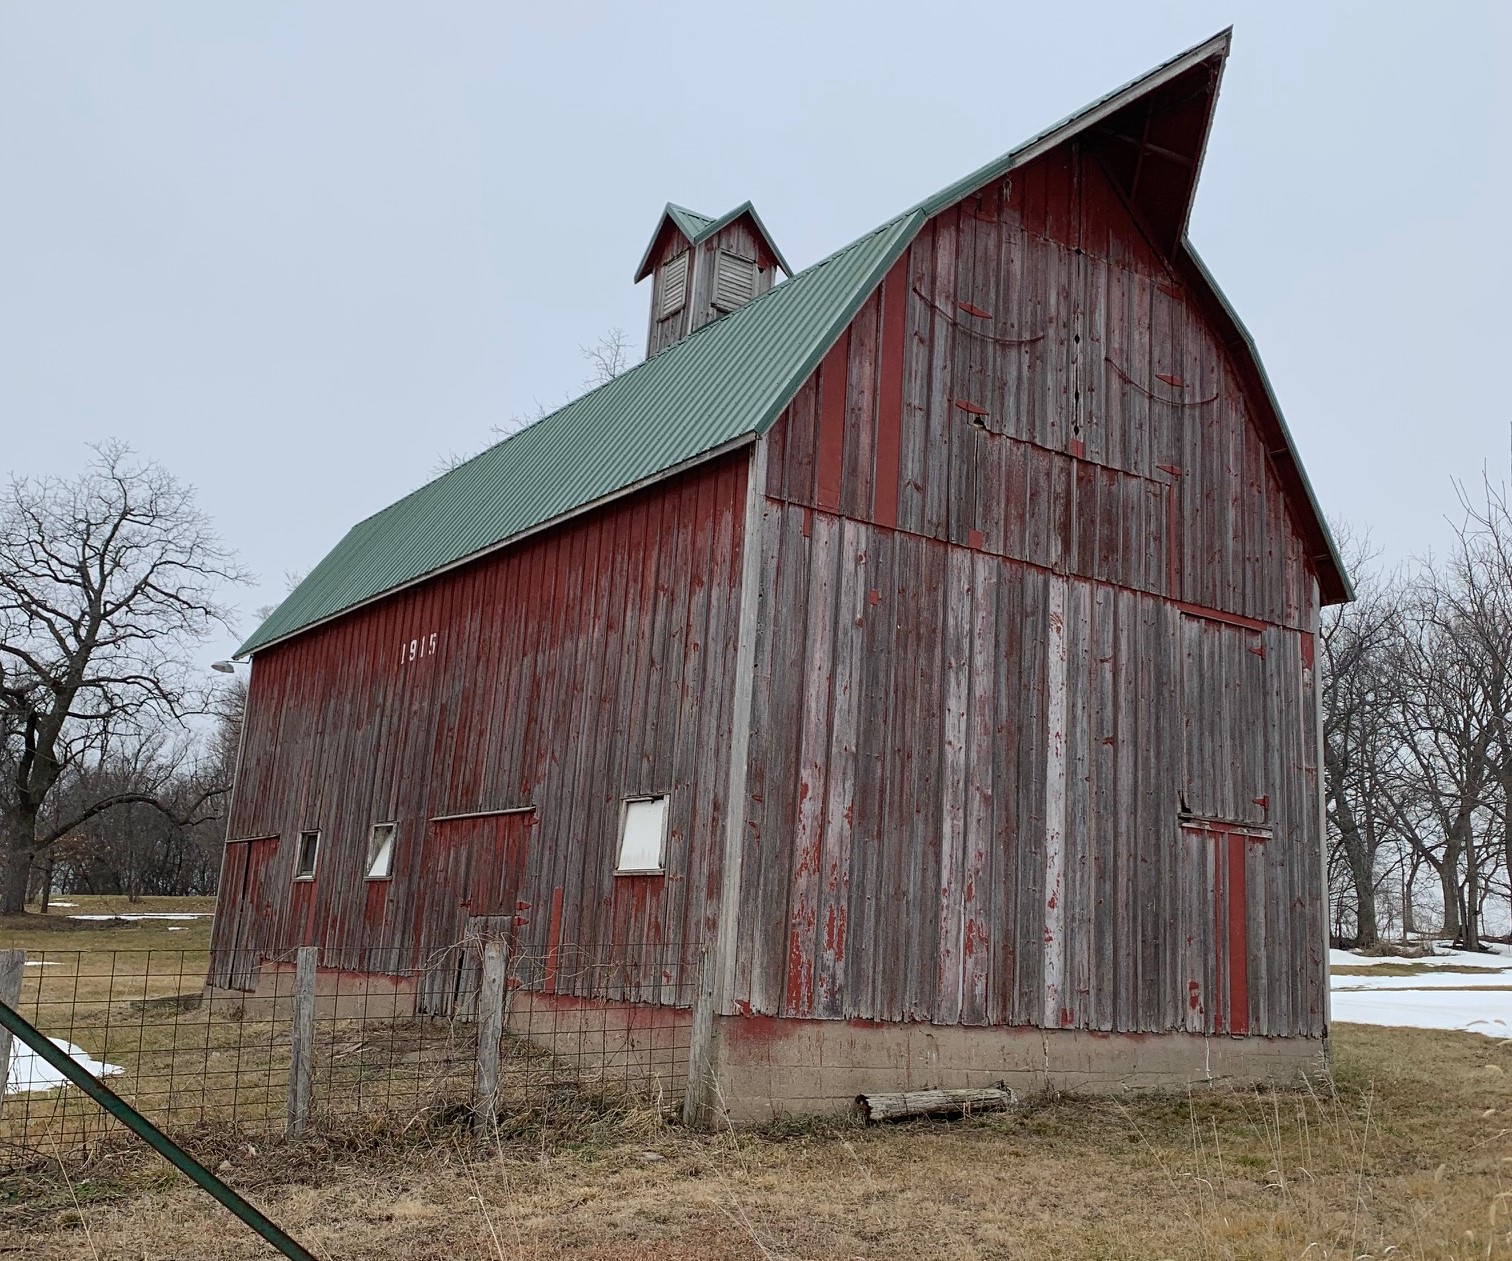 The 1915 red barn on Owl Acres. Weathered, board-and-batten siding and green metal roof. Four-sided cupola with louvered panels perches on top. The roof has a sharp, pointed extension over the east gable, housing the track for the hay conveyor and providing partial cover for the large hay doors.